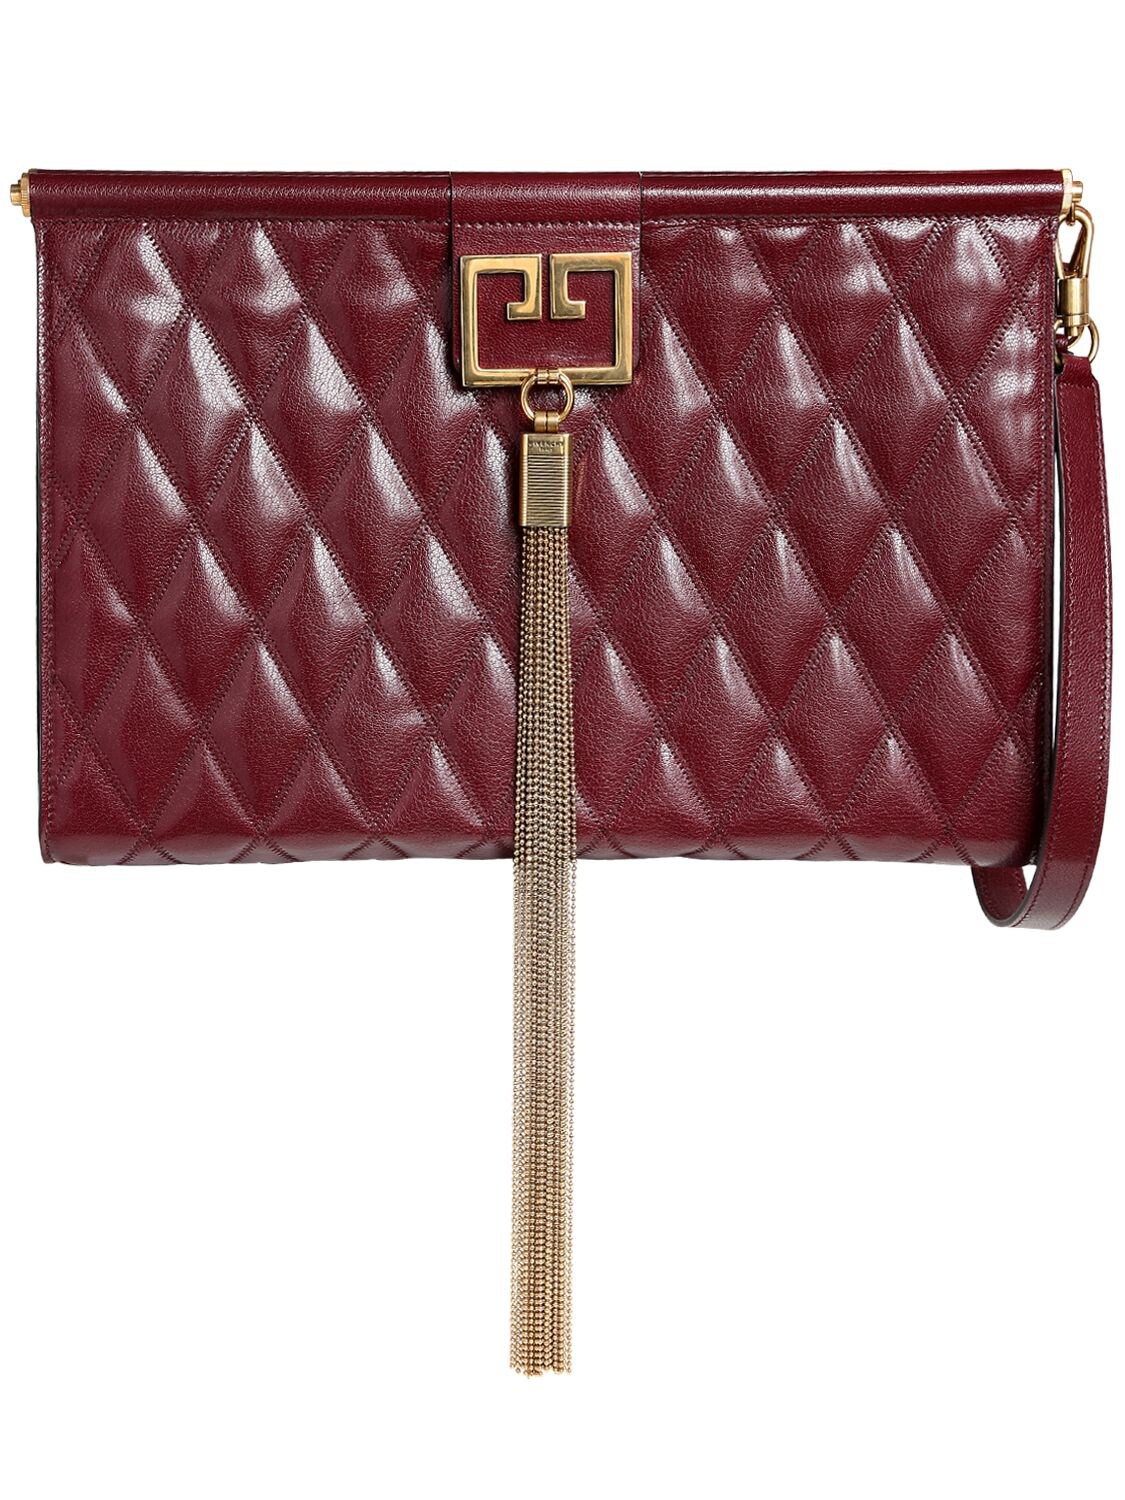 Givenchy Large Gem Quilted Leather Clutch In Bordeaux